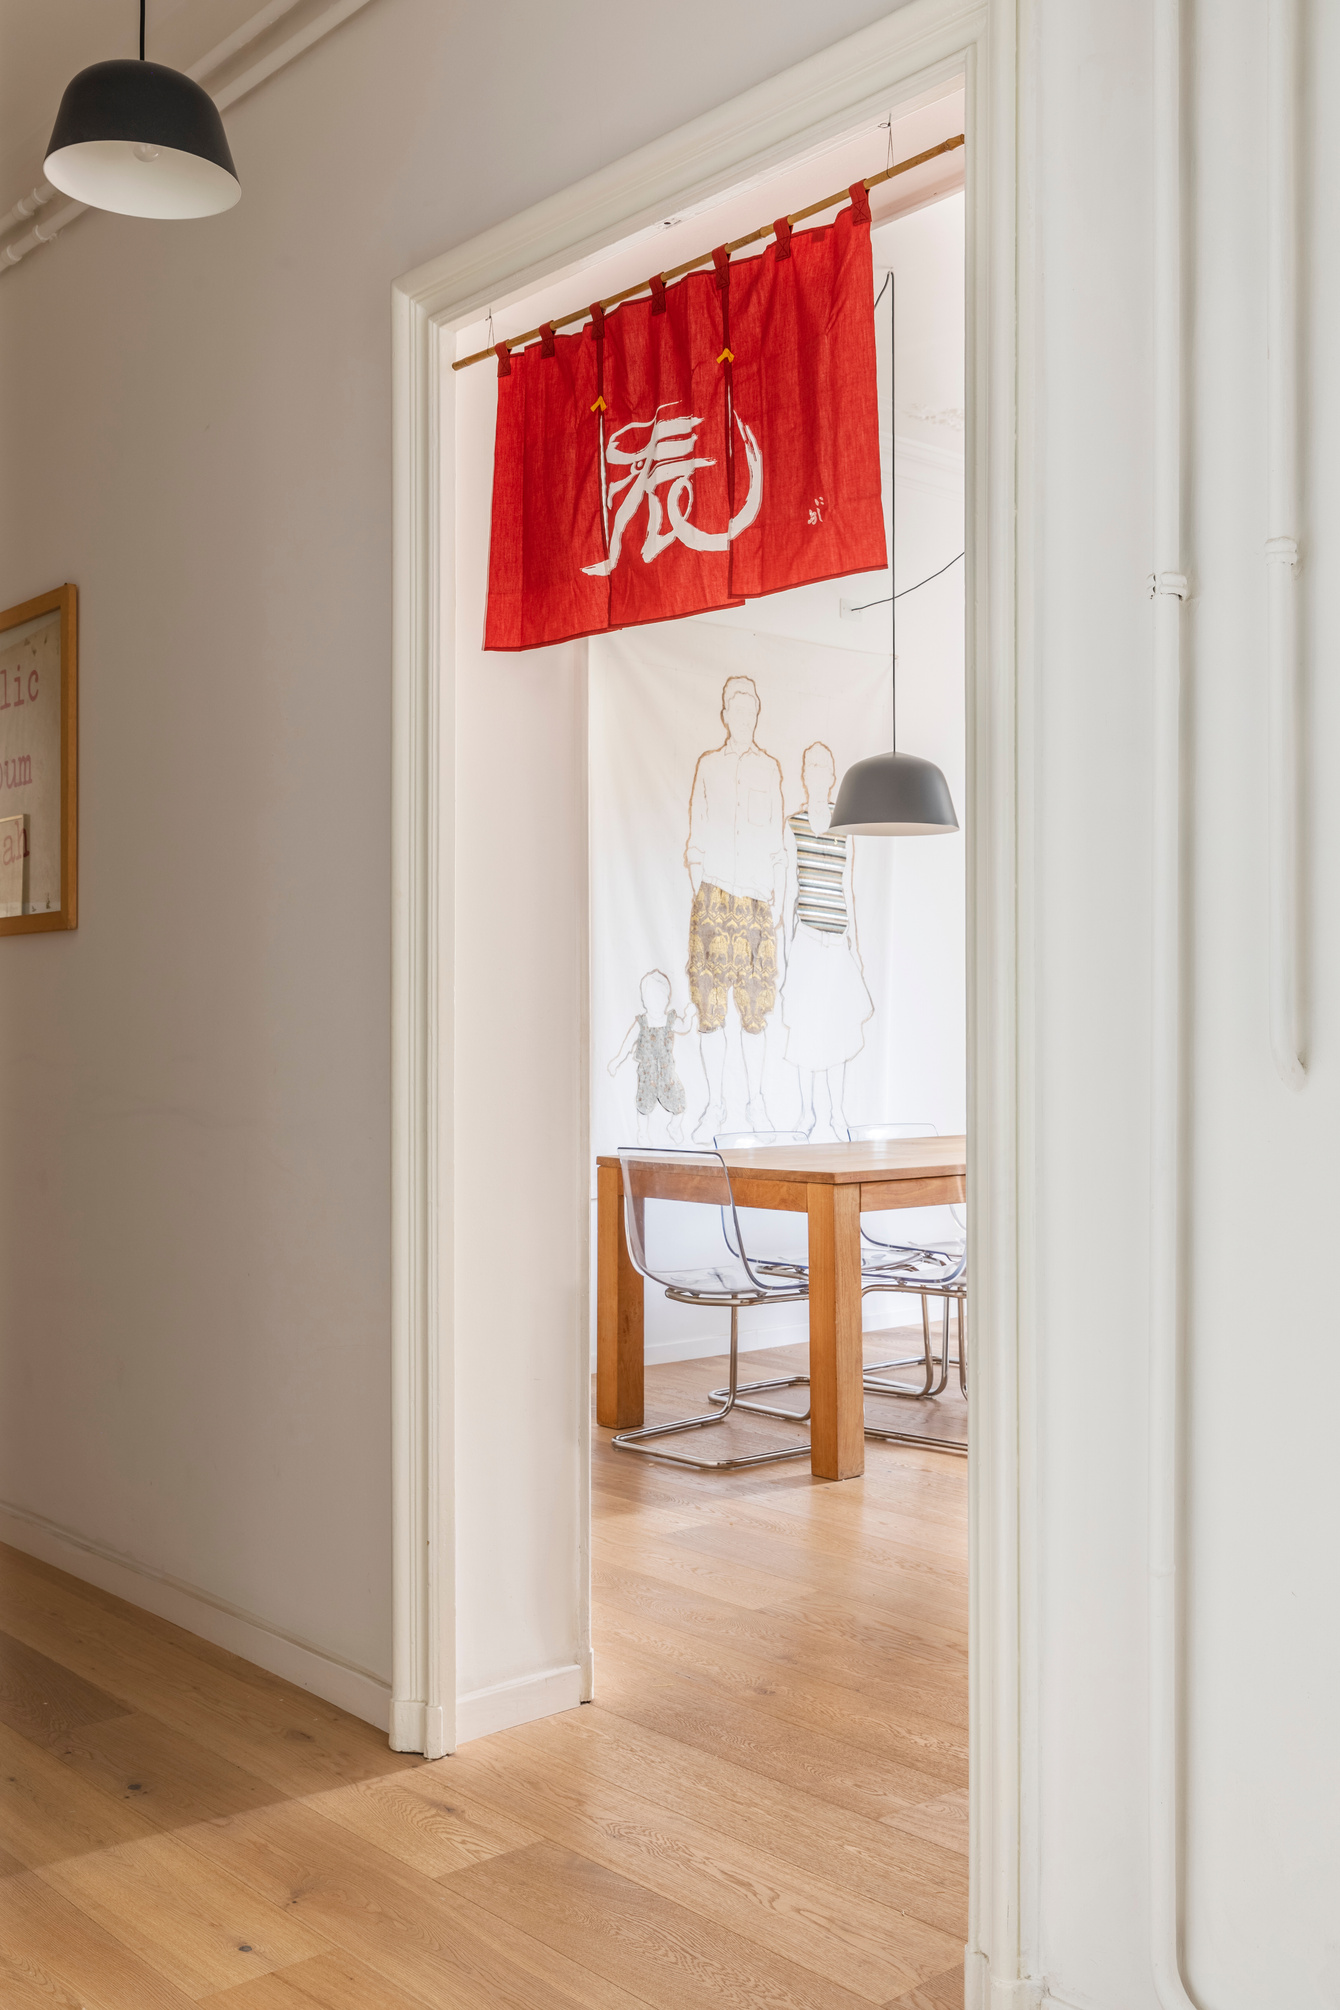 Japanese Curtain Hanging on Door Frame